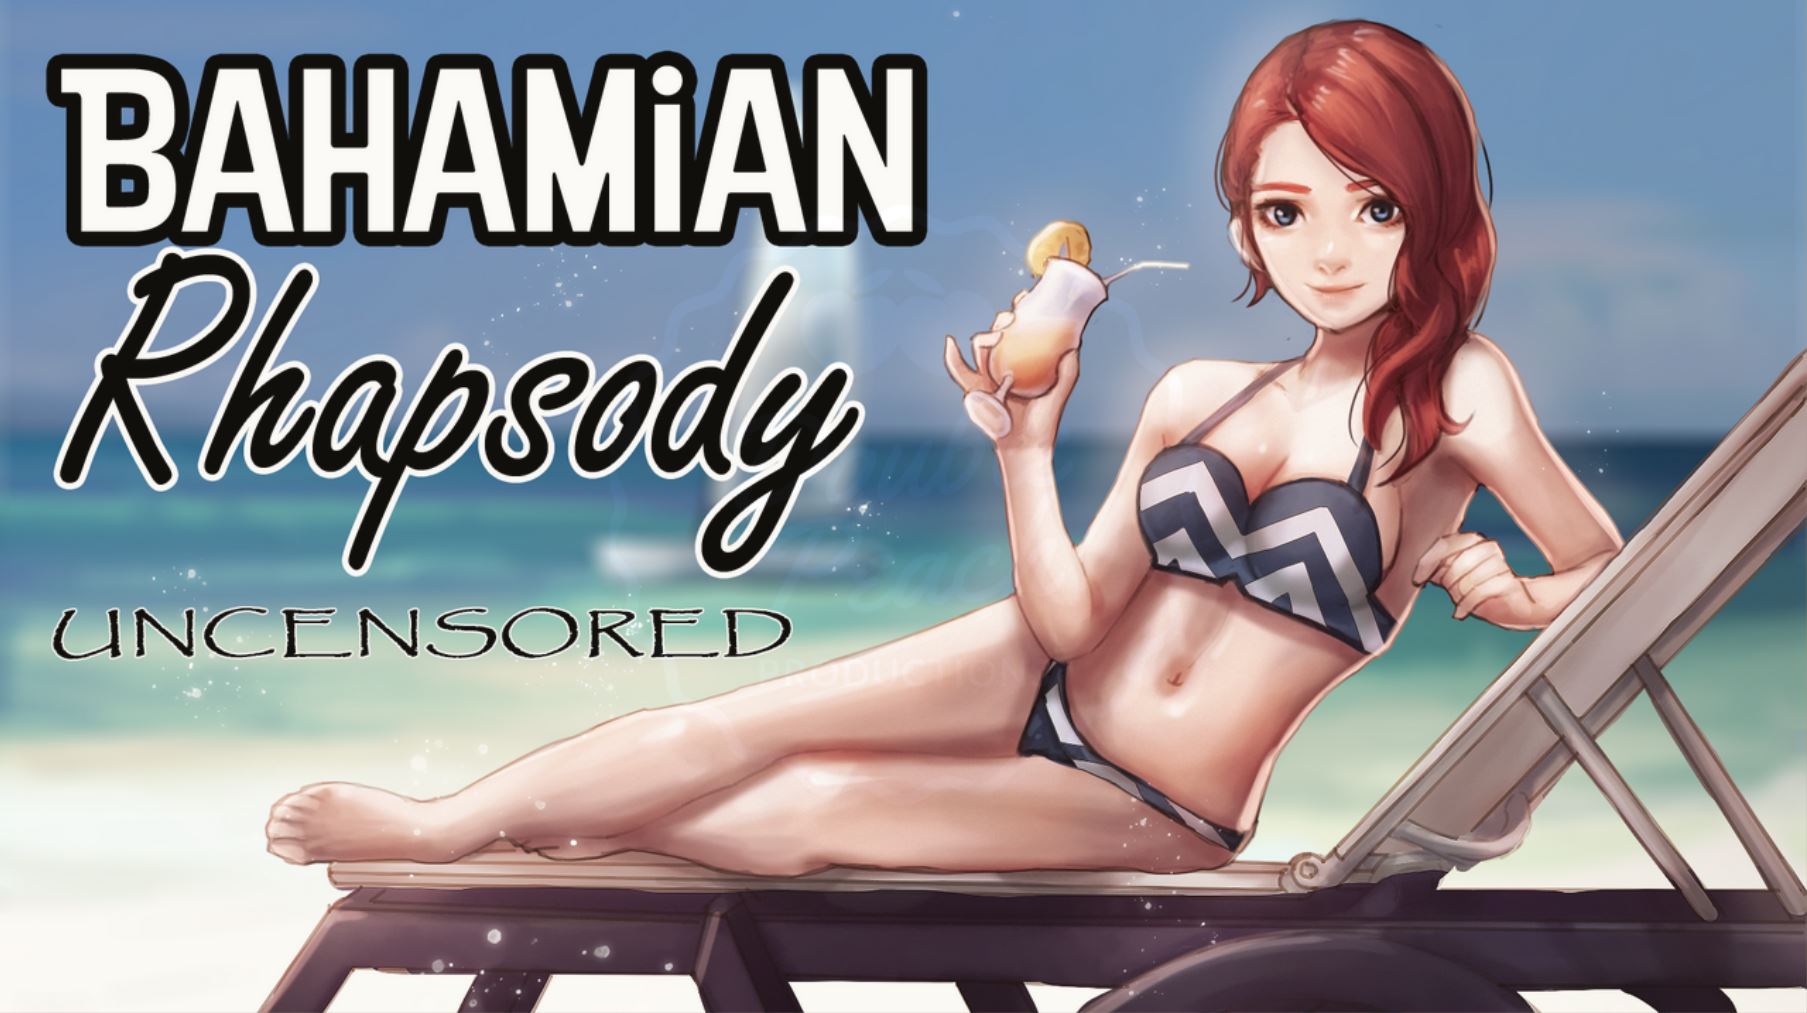 Bahamian Rhapsody porn xxx game download cover